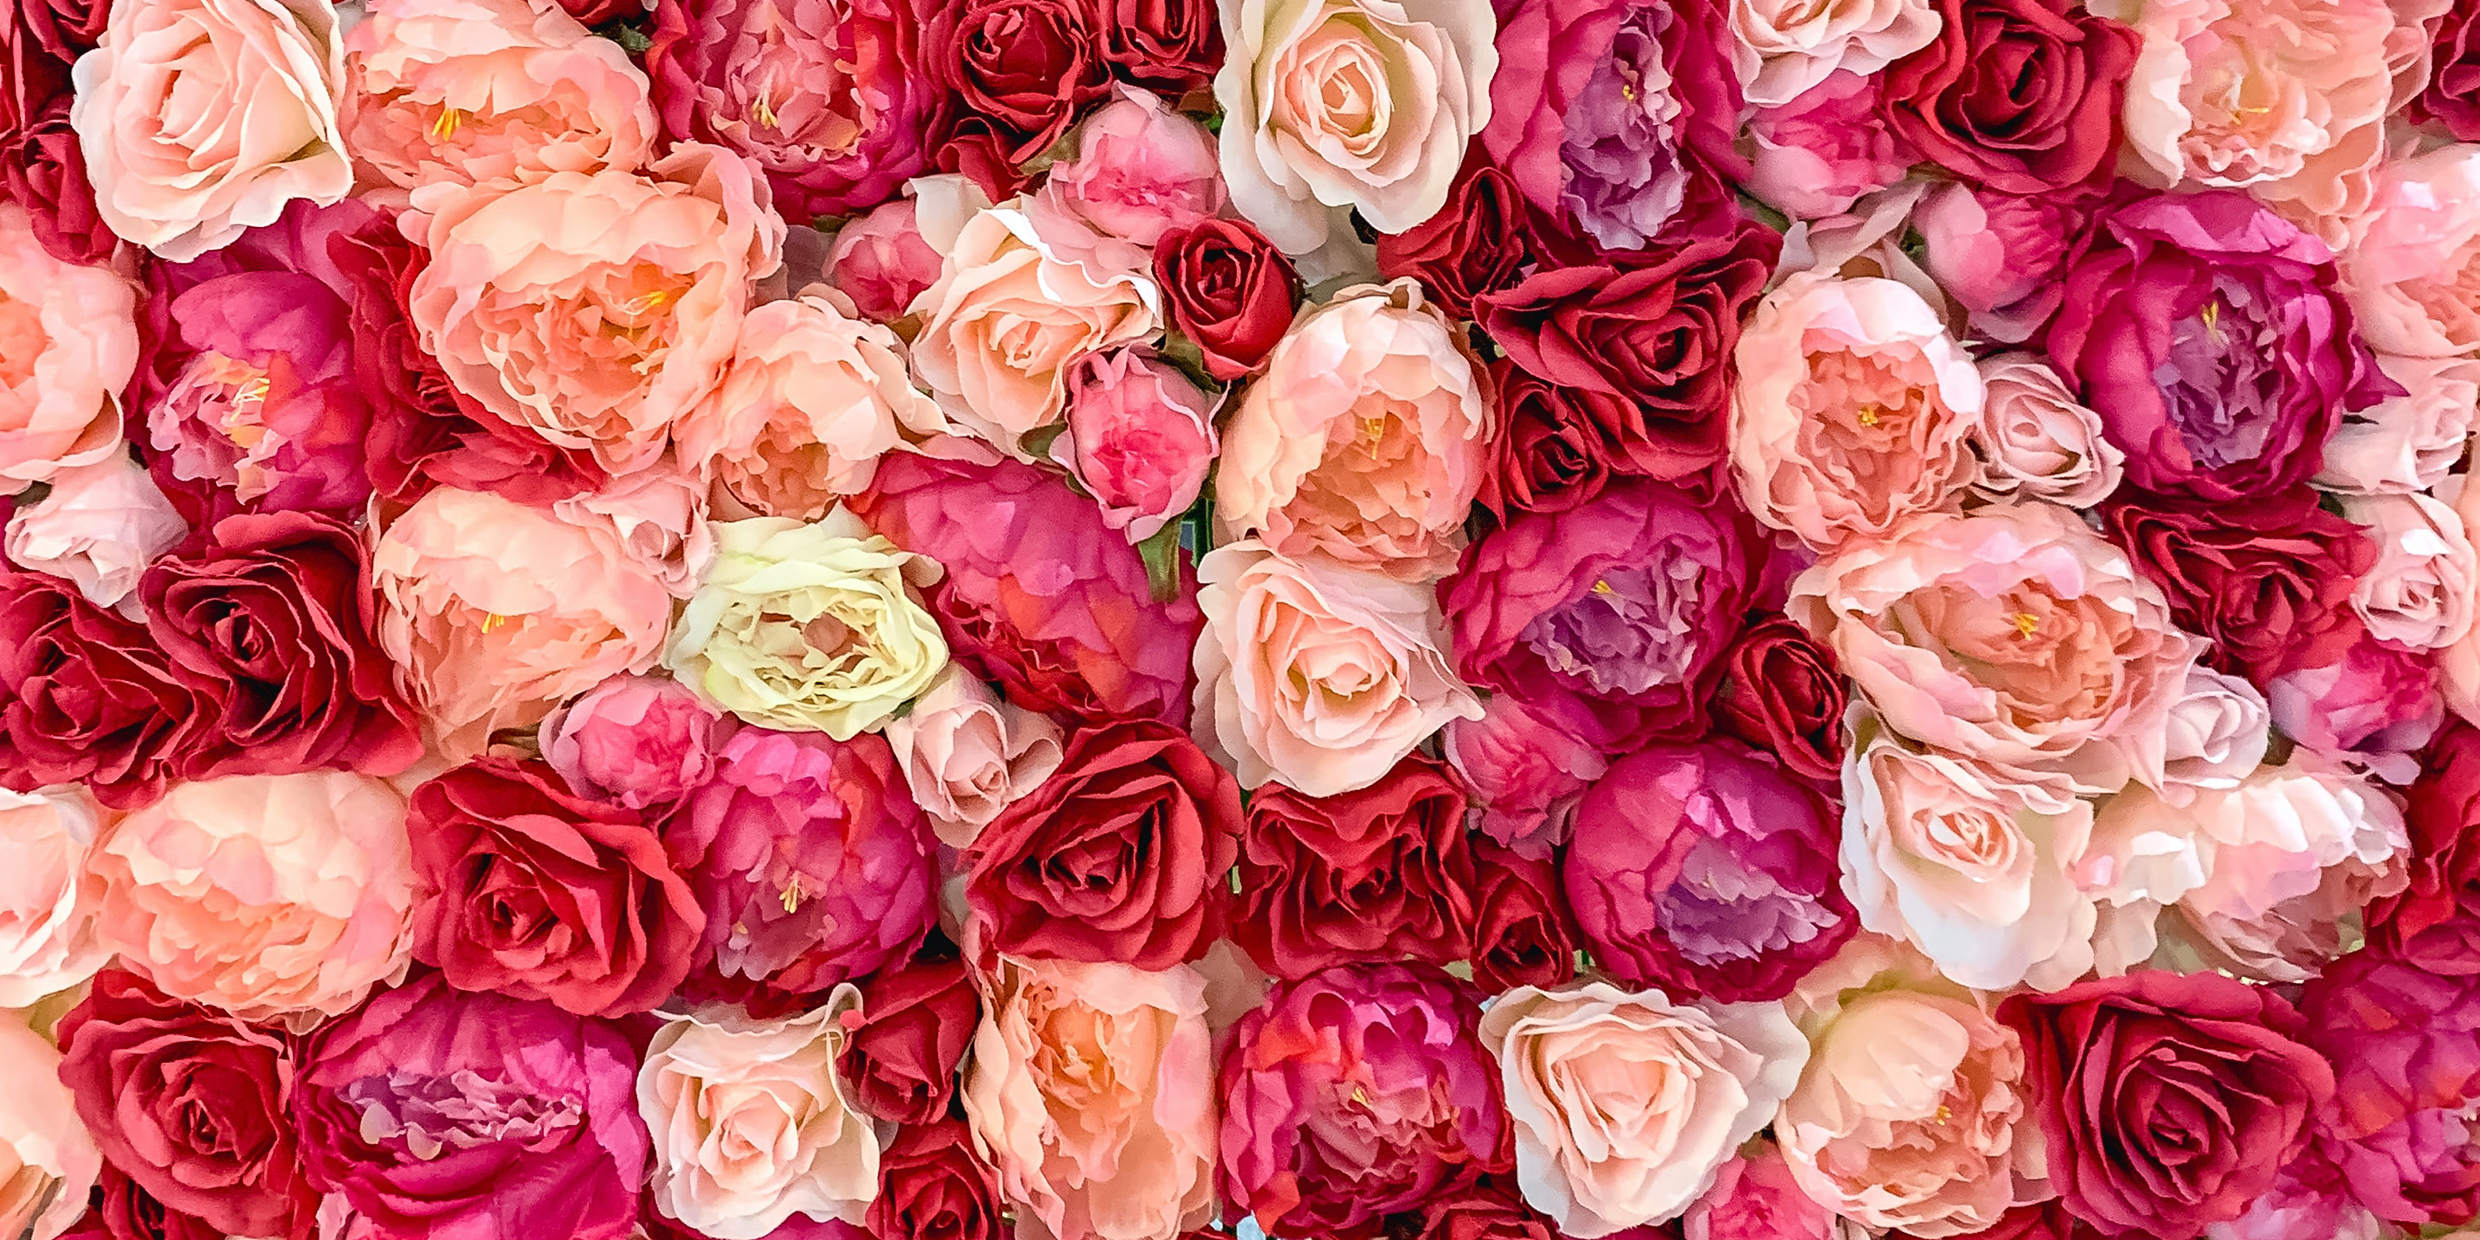 Image of a large assortment of red and pink roses